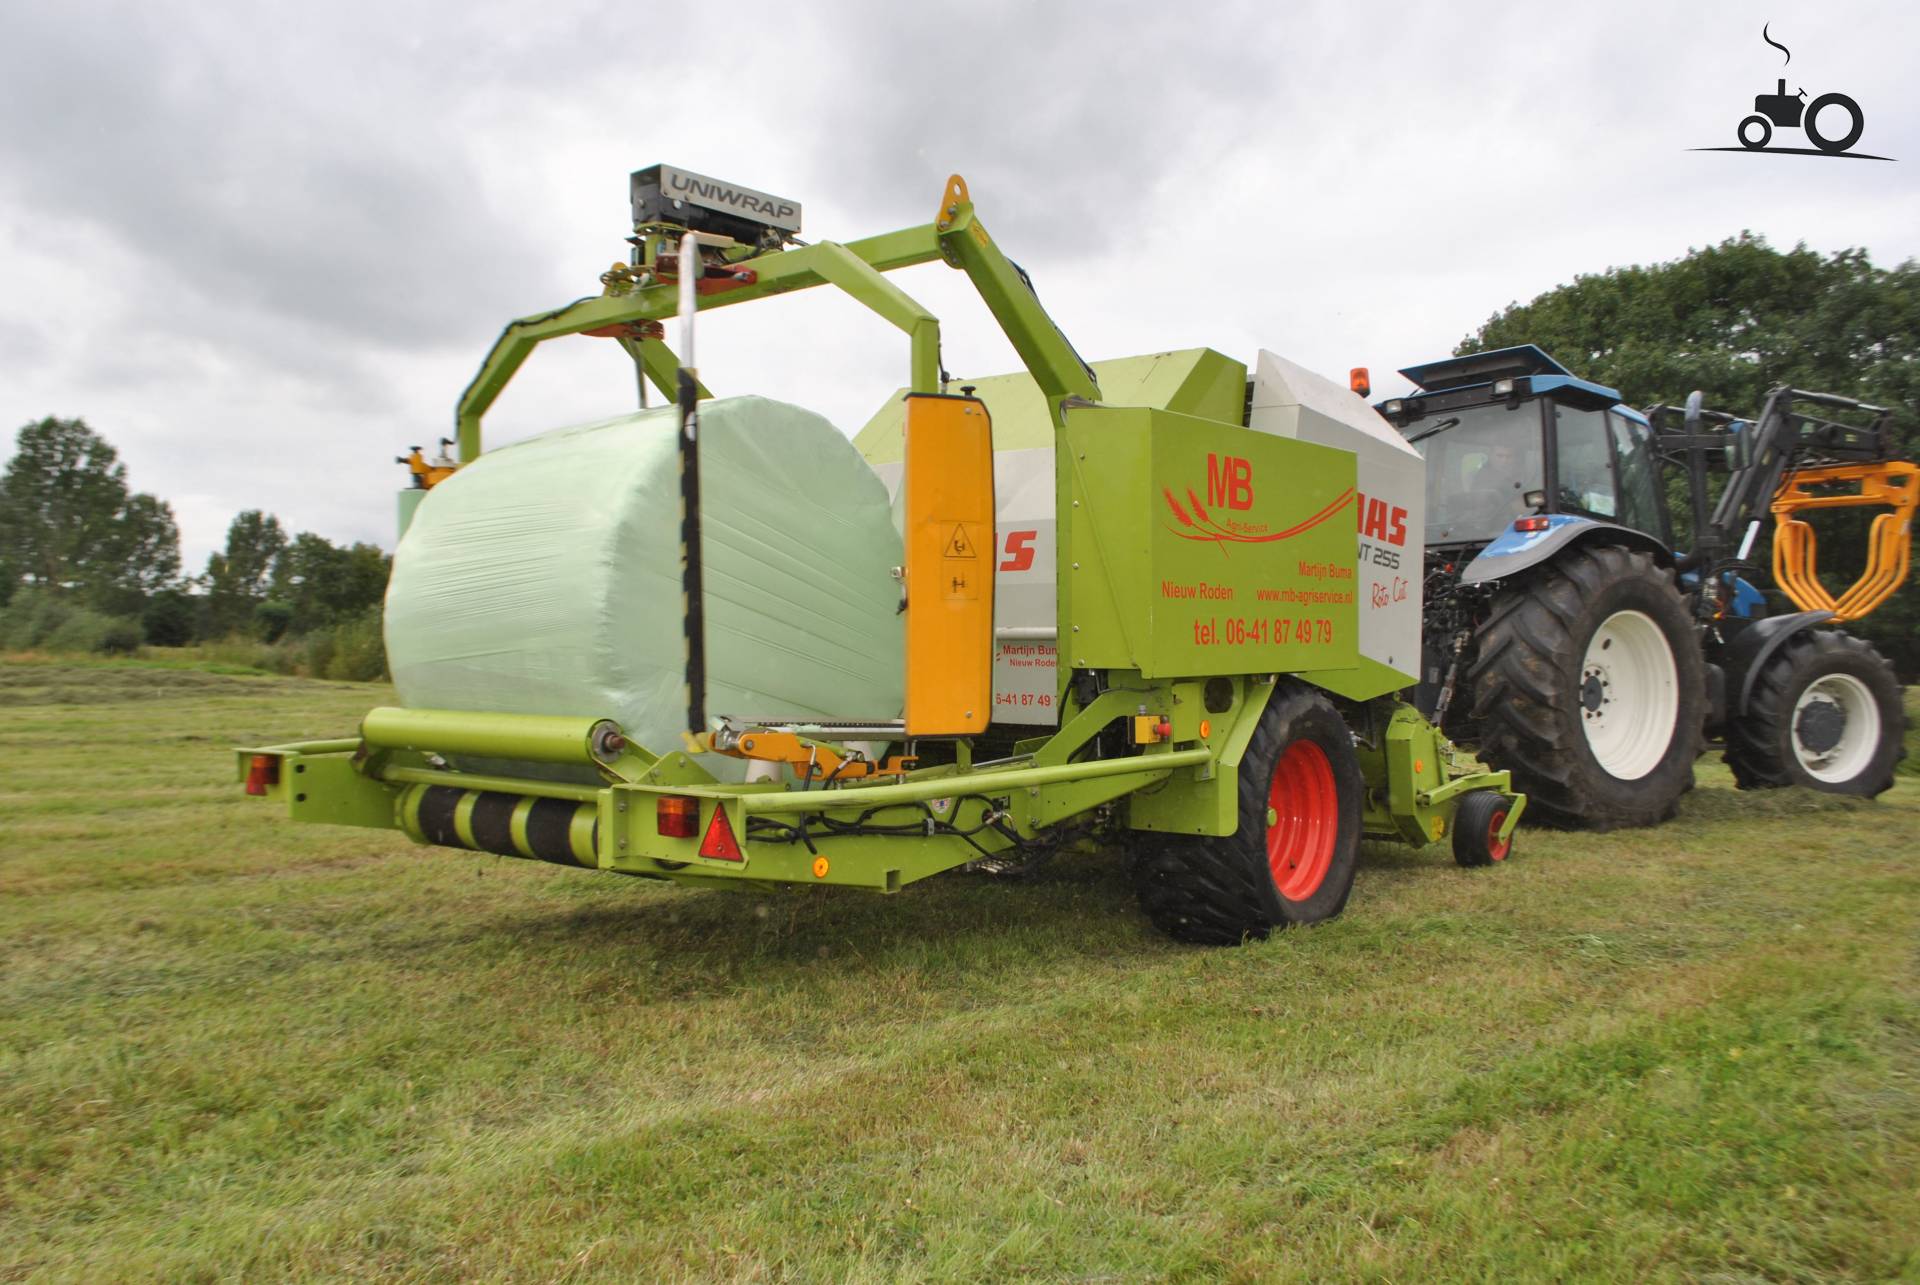 Claas Rollant 255